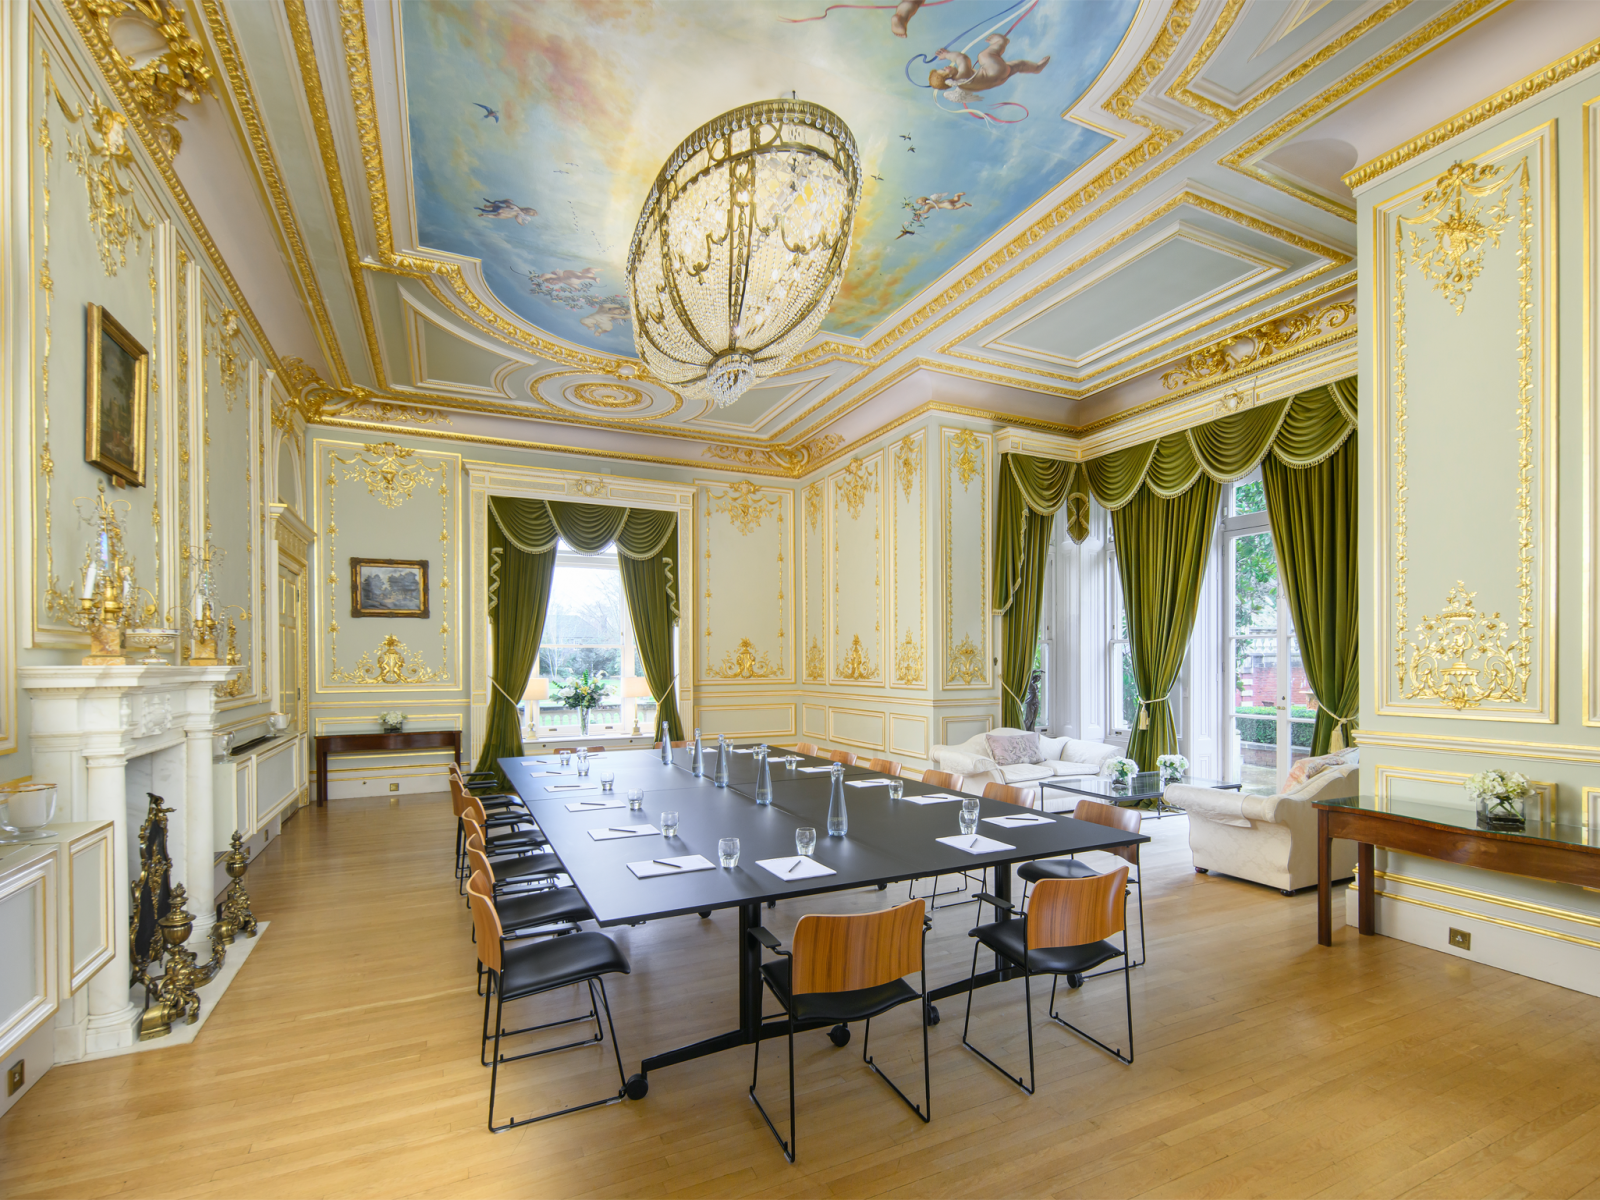 The Salon can be configured to suit your meeting requirements